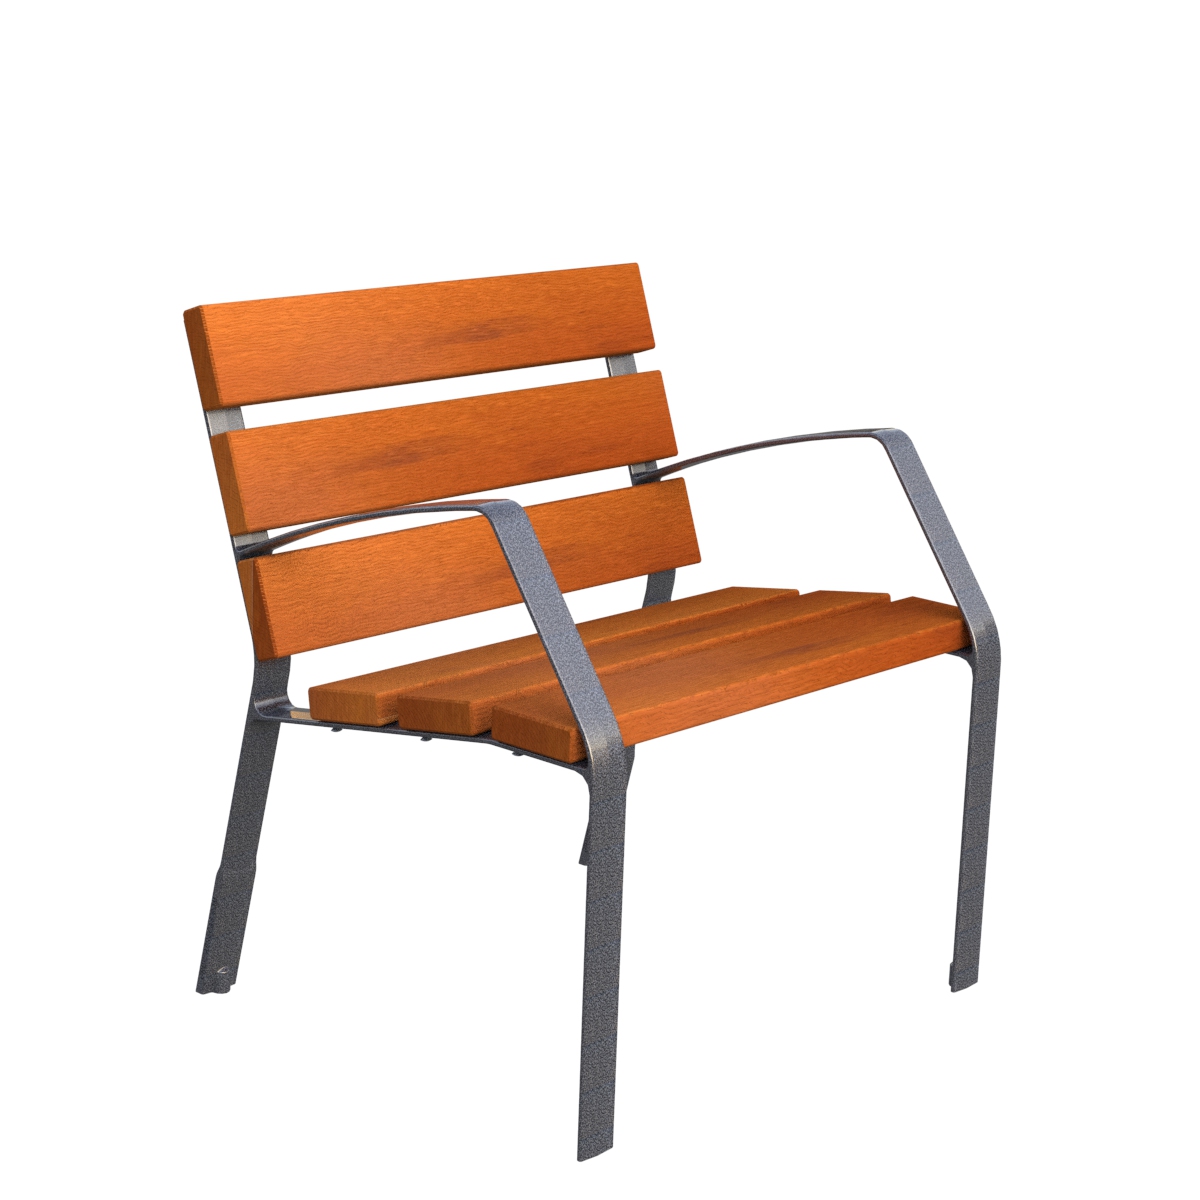 MODO08 chair in cast iron and tropical wood